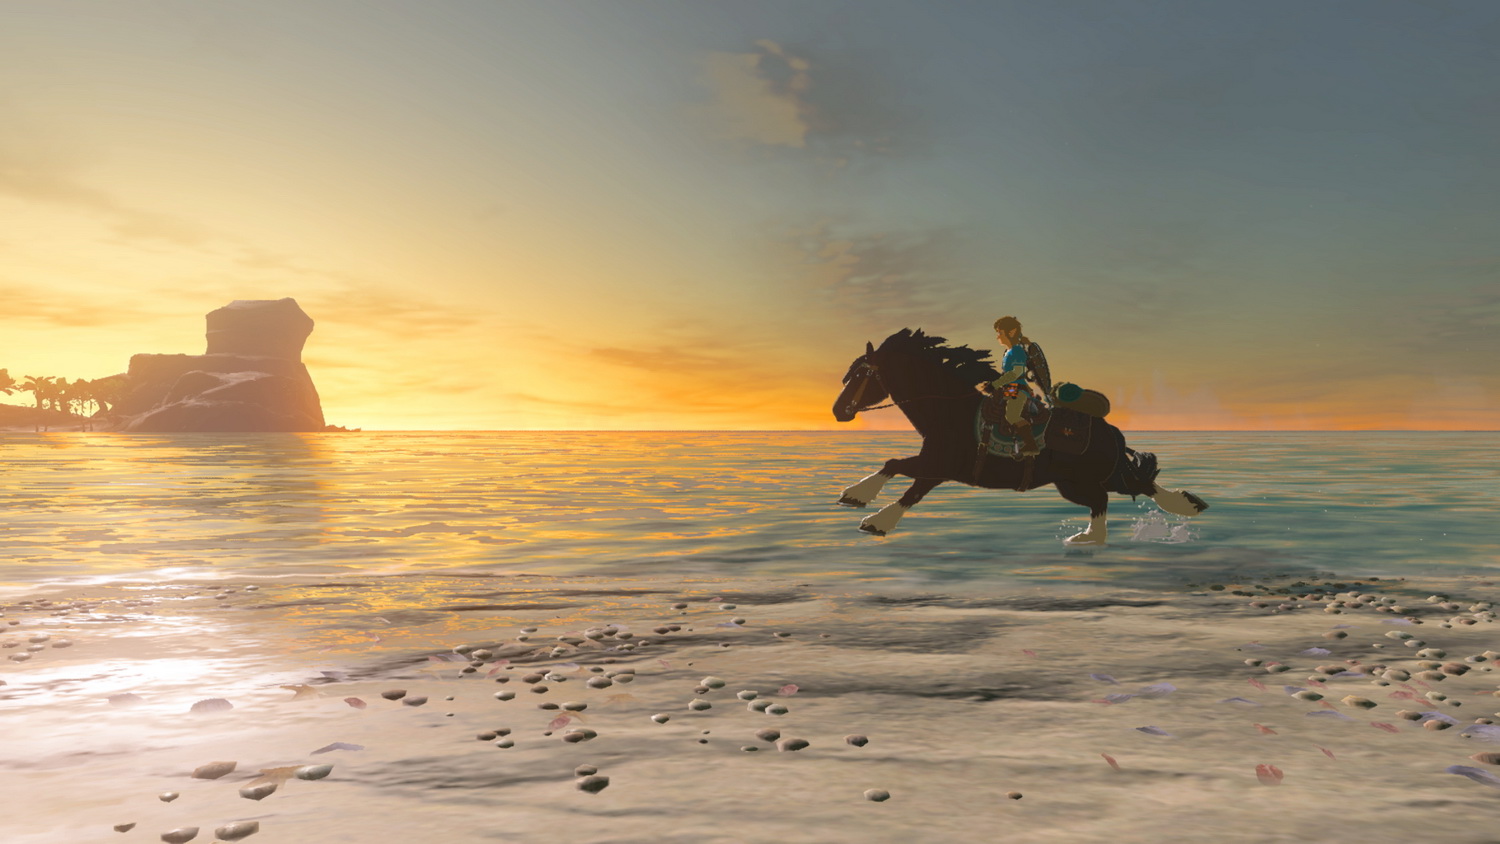 The Legend of Zelda: Breath of the Wild patch 1.1.1 is great for the Switch  version, not so much for Wii U